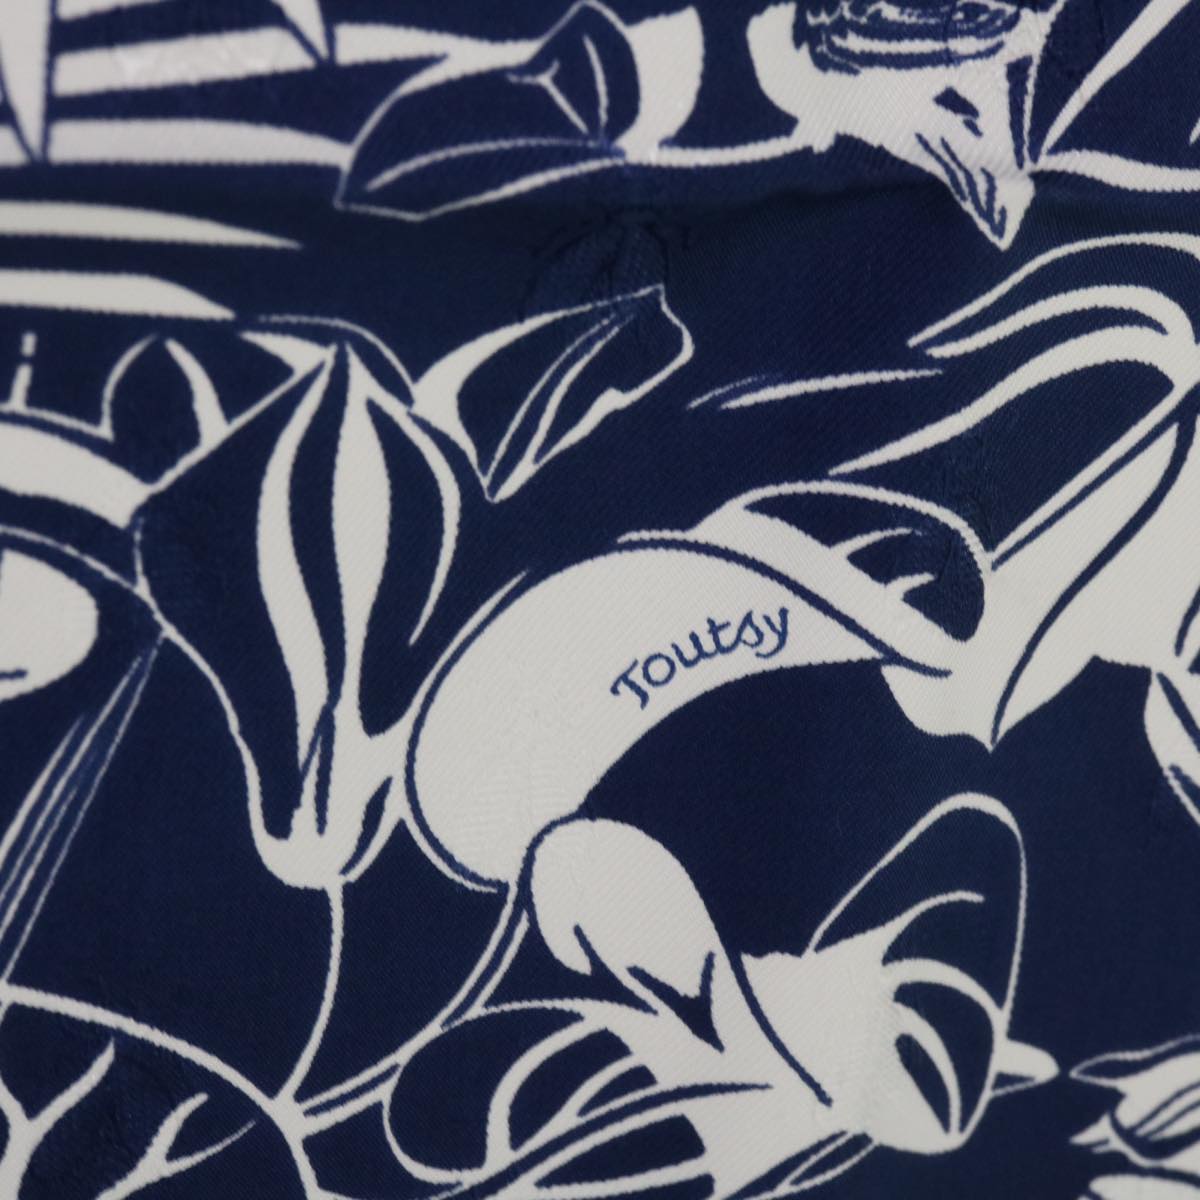 HERMES Carre 90 Flamingo Party Scarf Silk Blue White Auth tb978